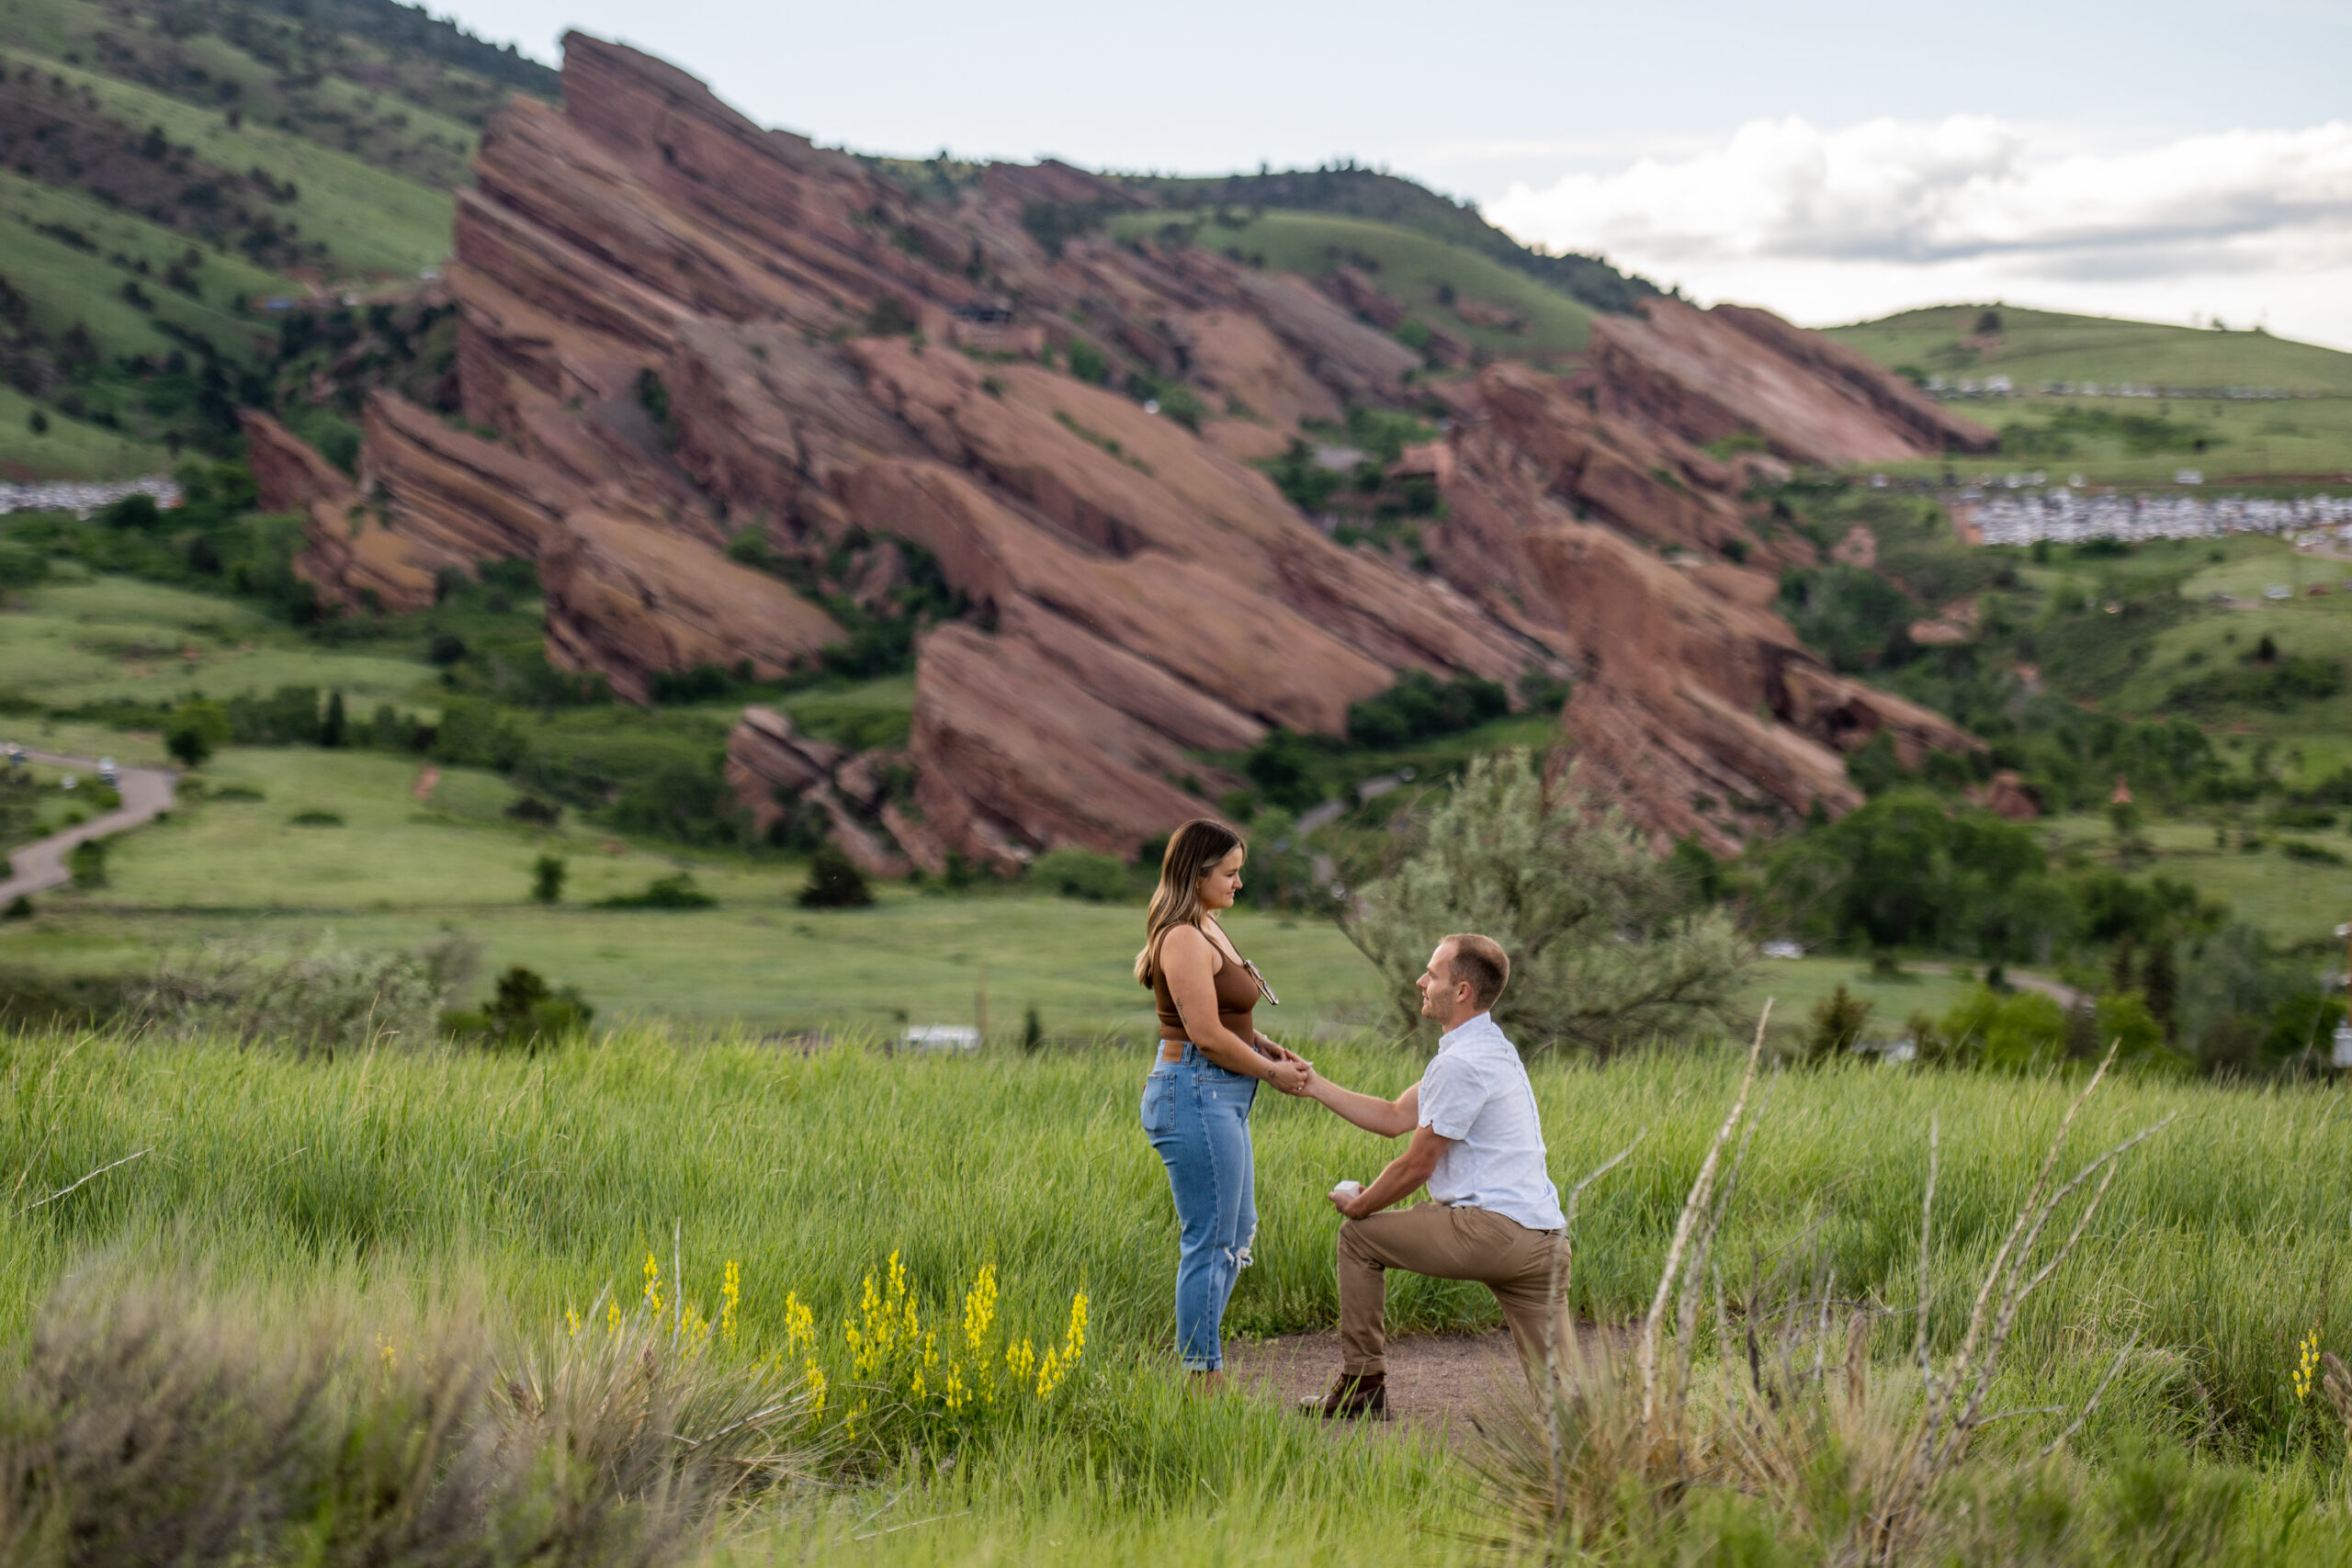 Ryan gets down on one knee before Elizabeth during a surprise proposal at Mt. Falcon Park East Trailhead near Denver, Colorado.